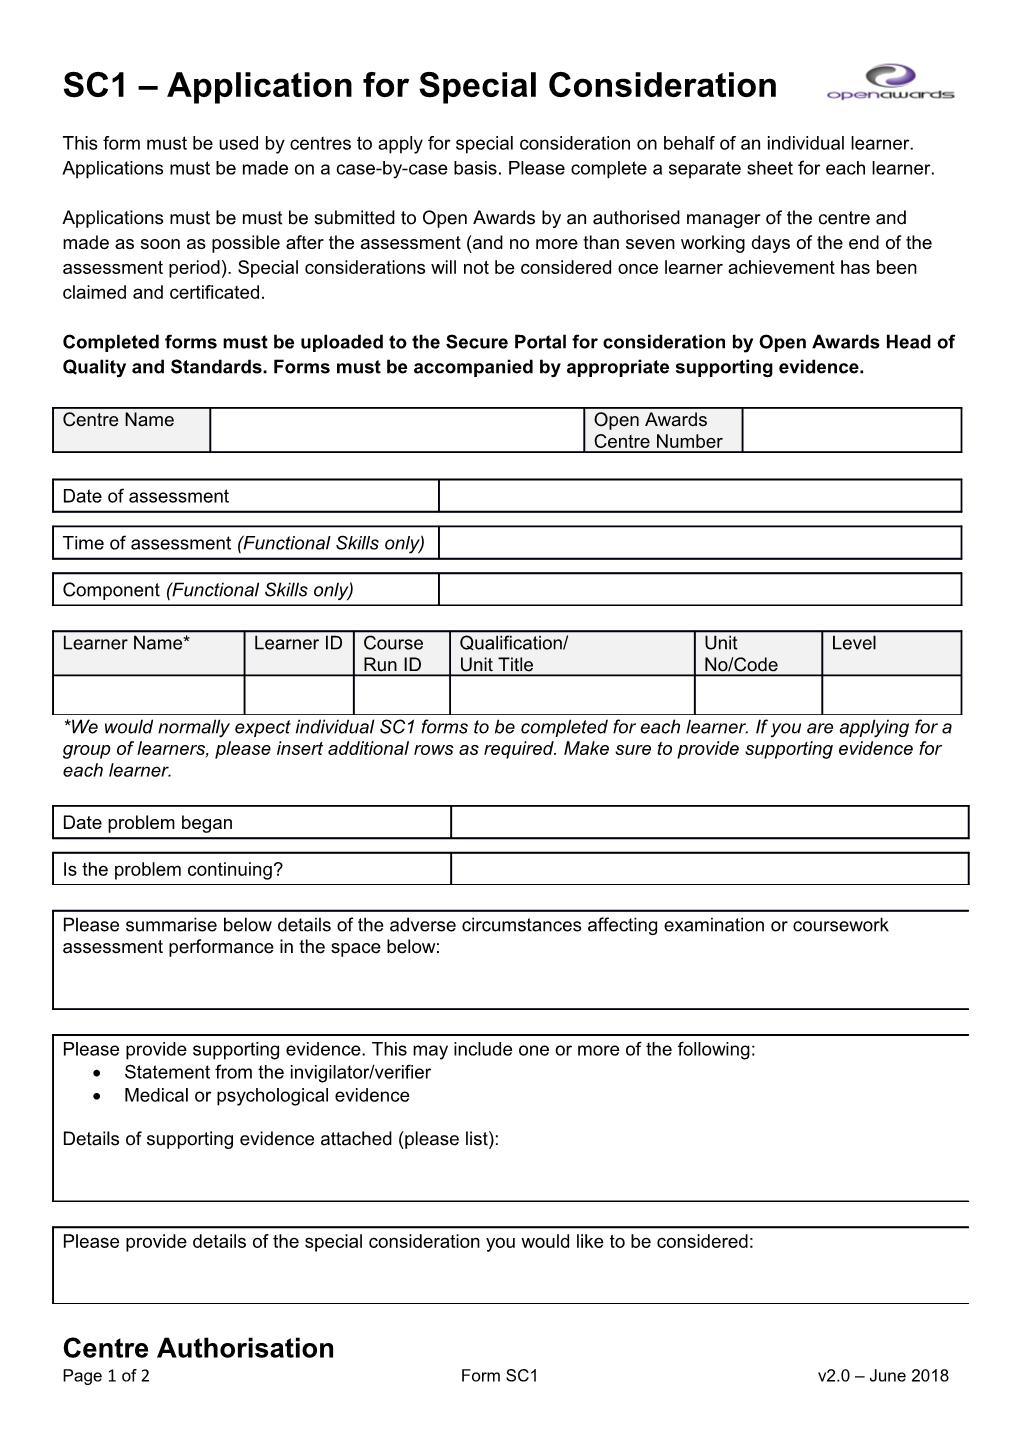 SC1 Application for Special Consideration